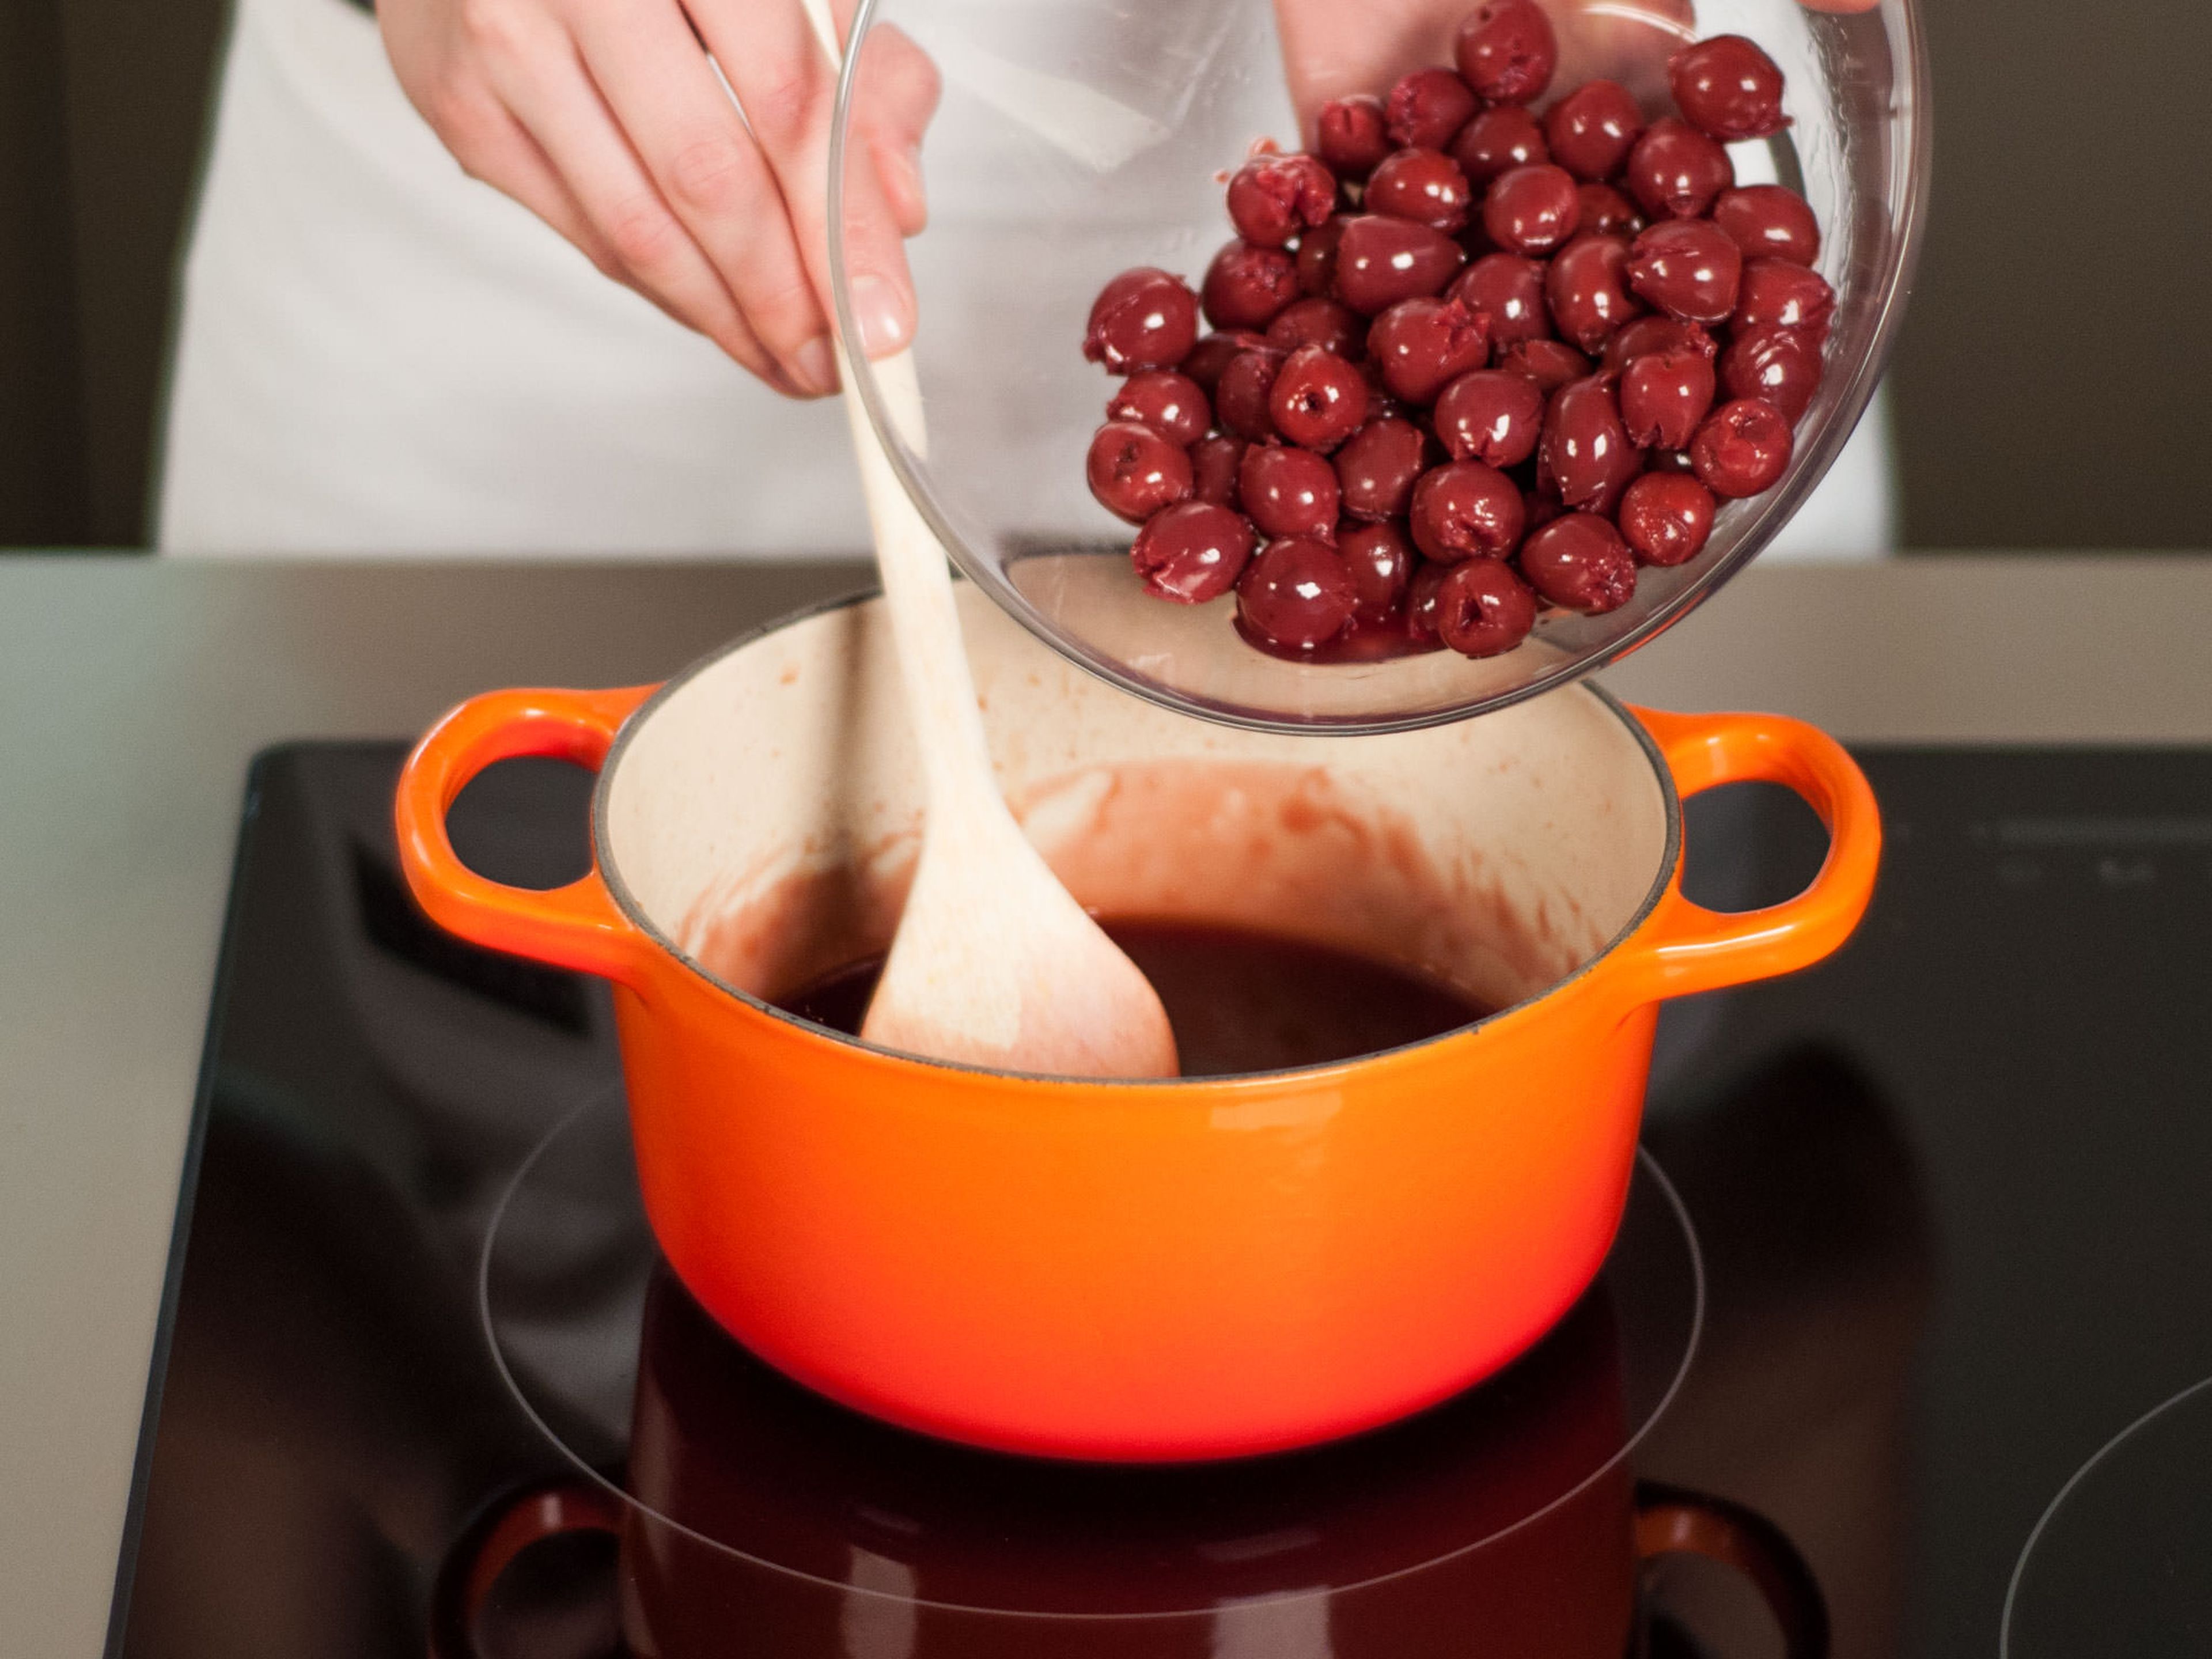 When the cherry sauce is reduced by half, add cherries. Continue to simmer for approx. 5 – 6 min.